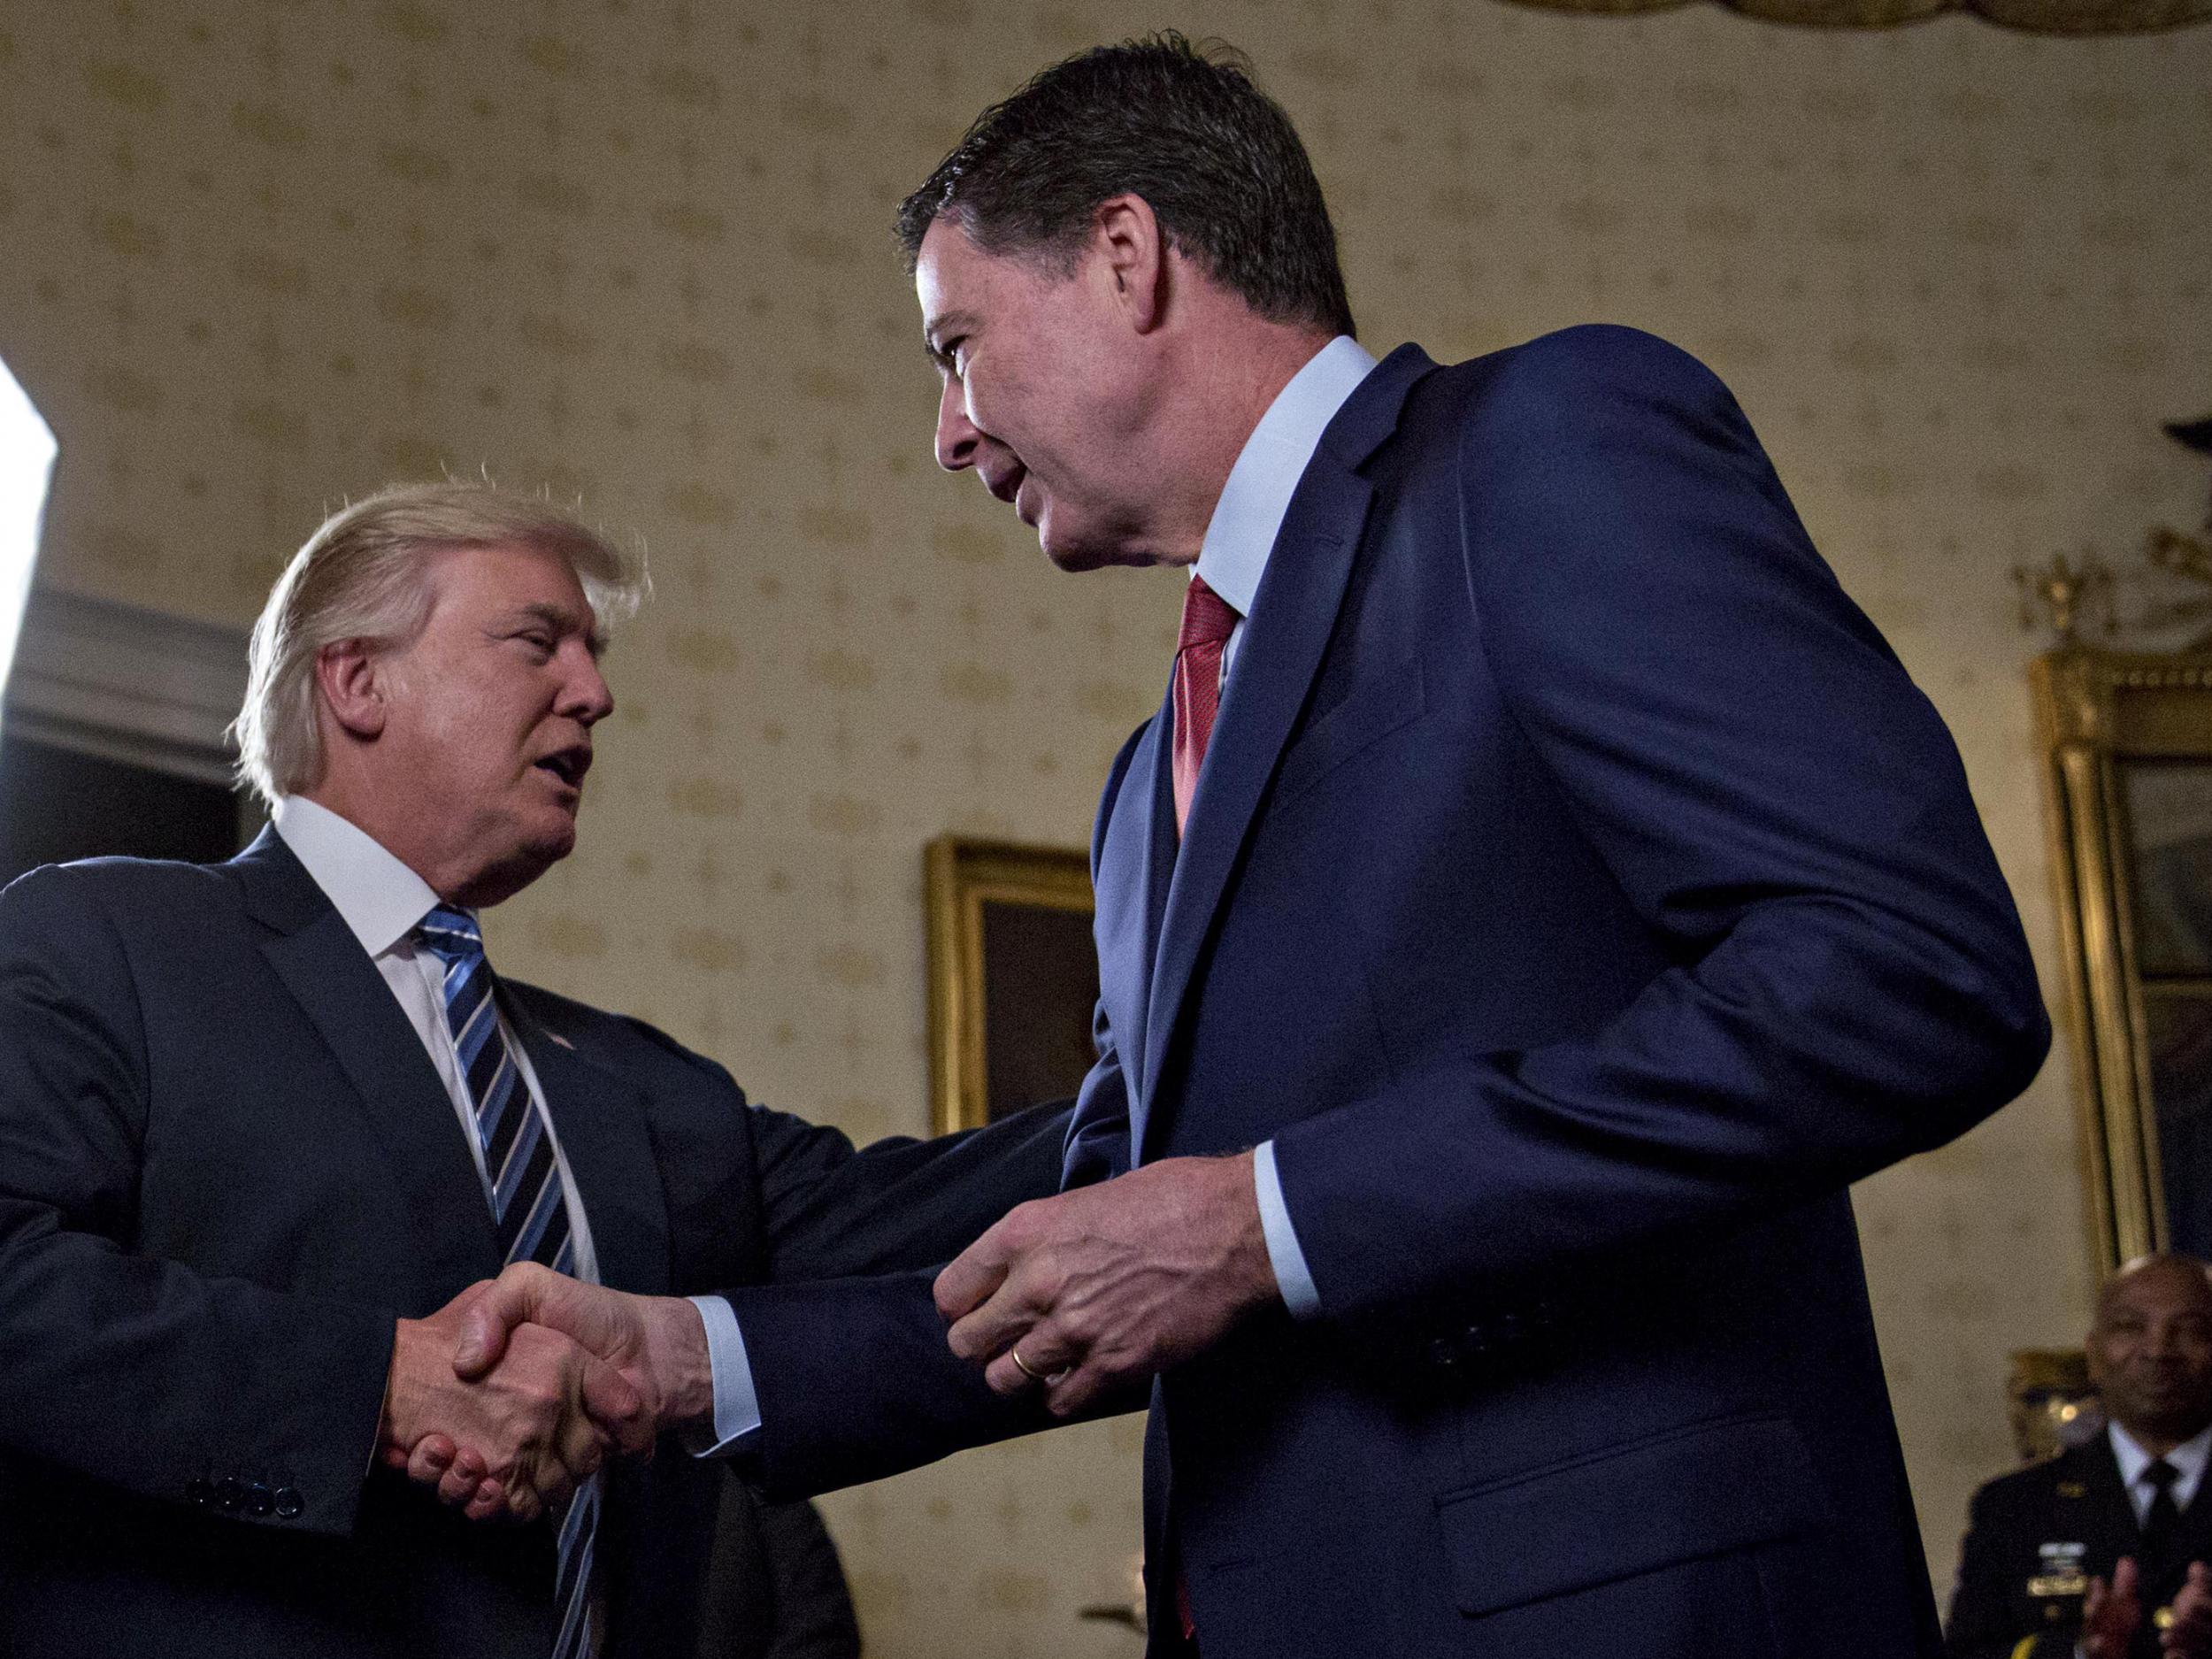 Donald Trump shakes hands with FBI director James Comey on 22 January 2017